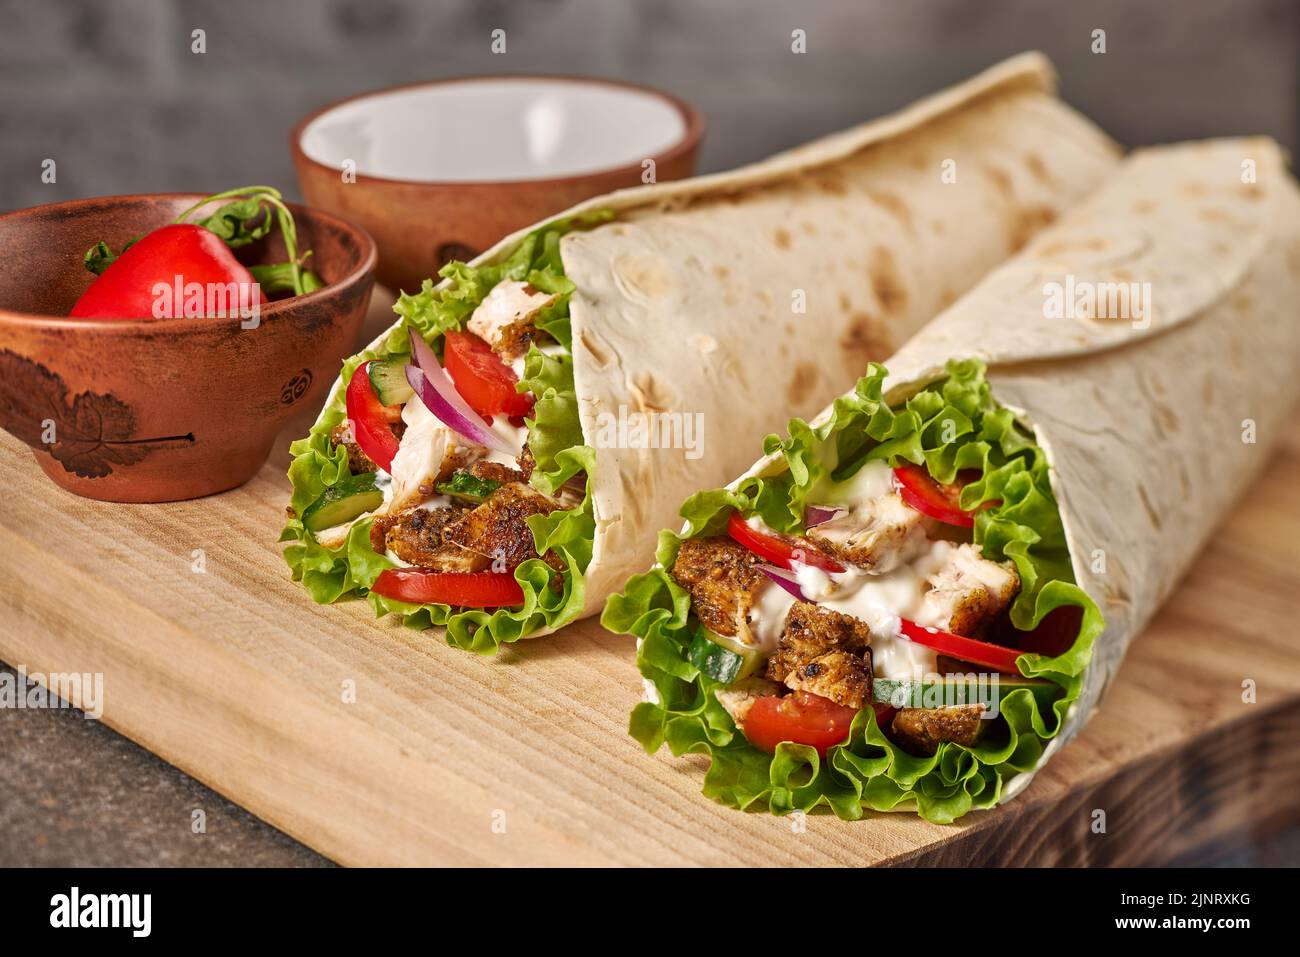 Two chicken wraps on wooden cutting board Stock Photo